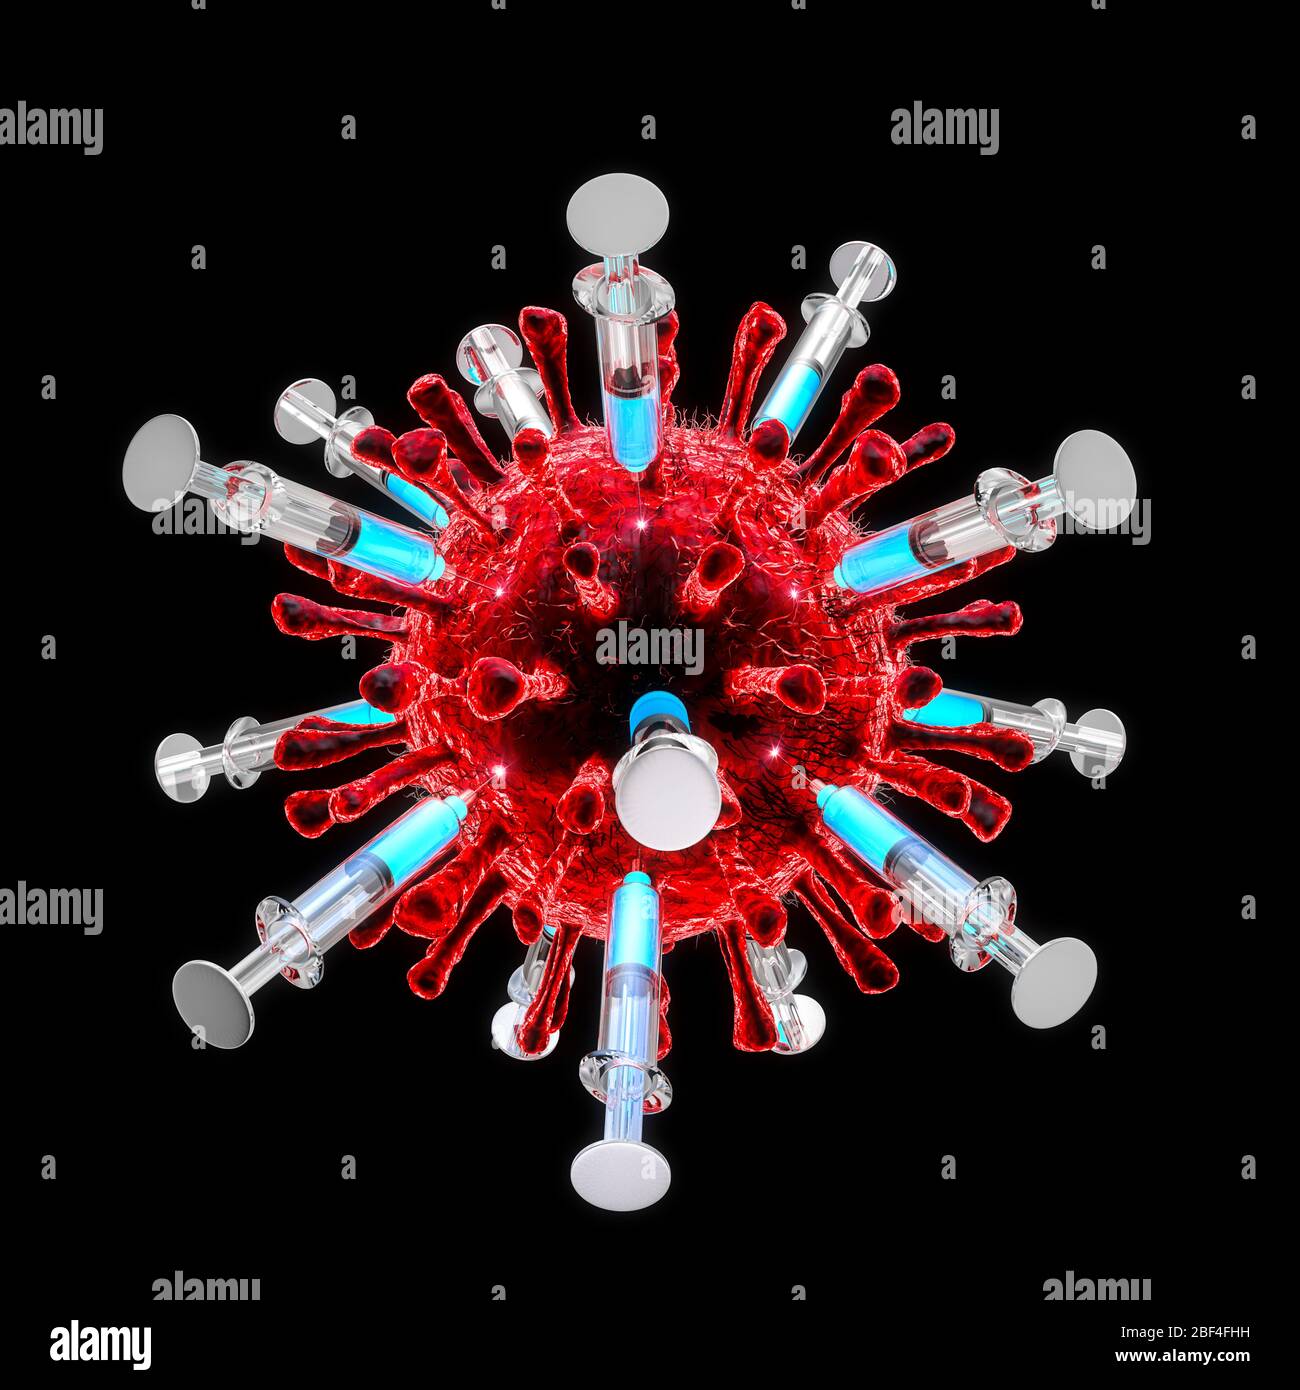 Covid-19 vaccine development concept / 3D illustration of multiple medical syringes injecting red coronavirus cell isolated on black background Stock Photo